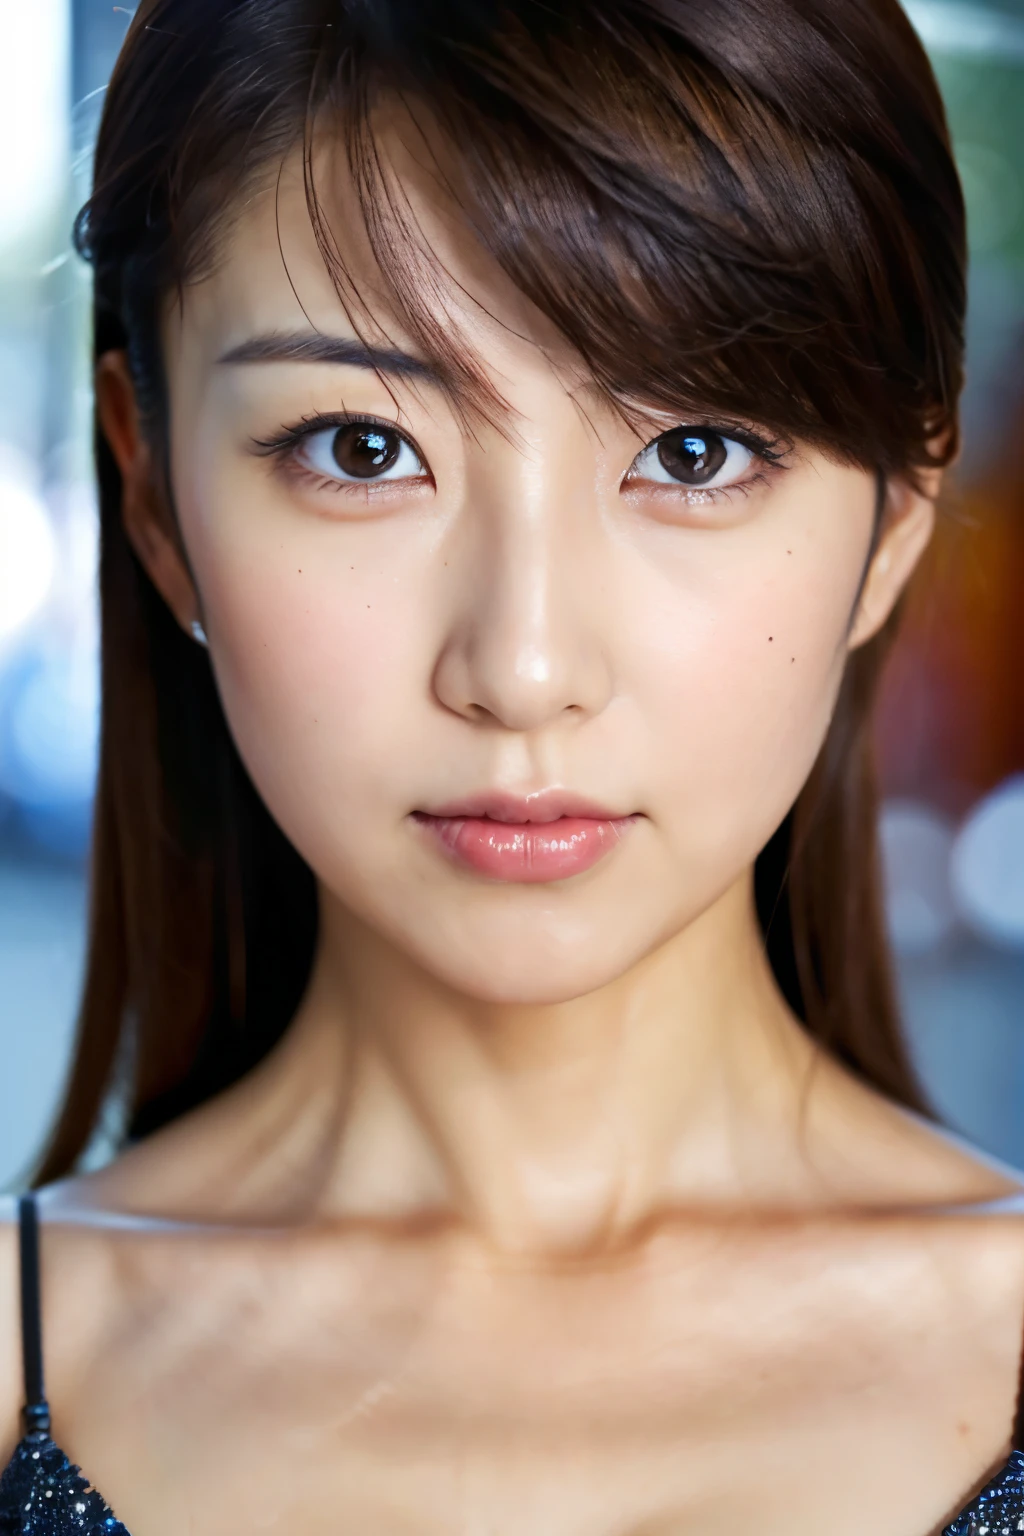 Masterpiece, 8K, high quality, high resolution, beautiful Japanese woman, 30 years old, poker face, glaring eyes, (detailed face, detailed eyes), looking at viewer, portrait